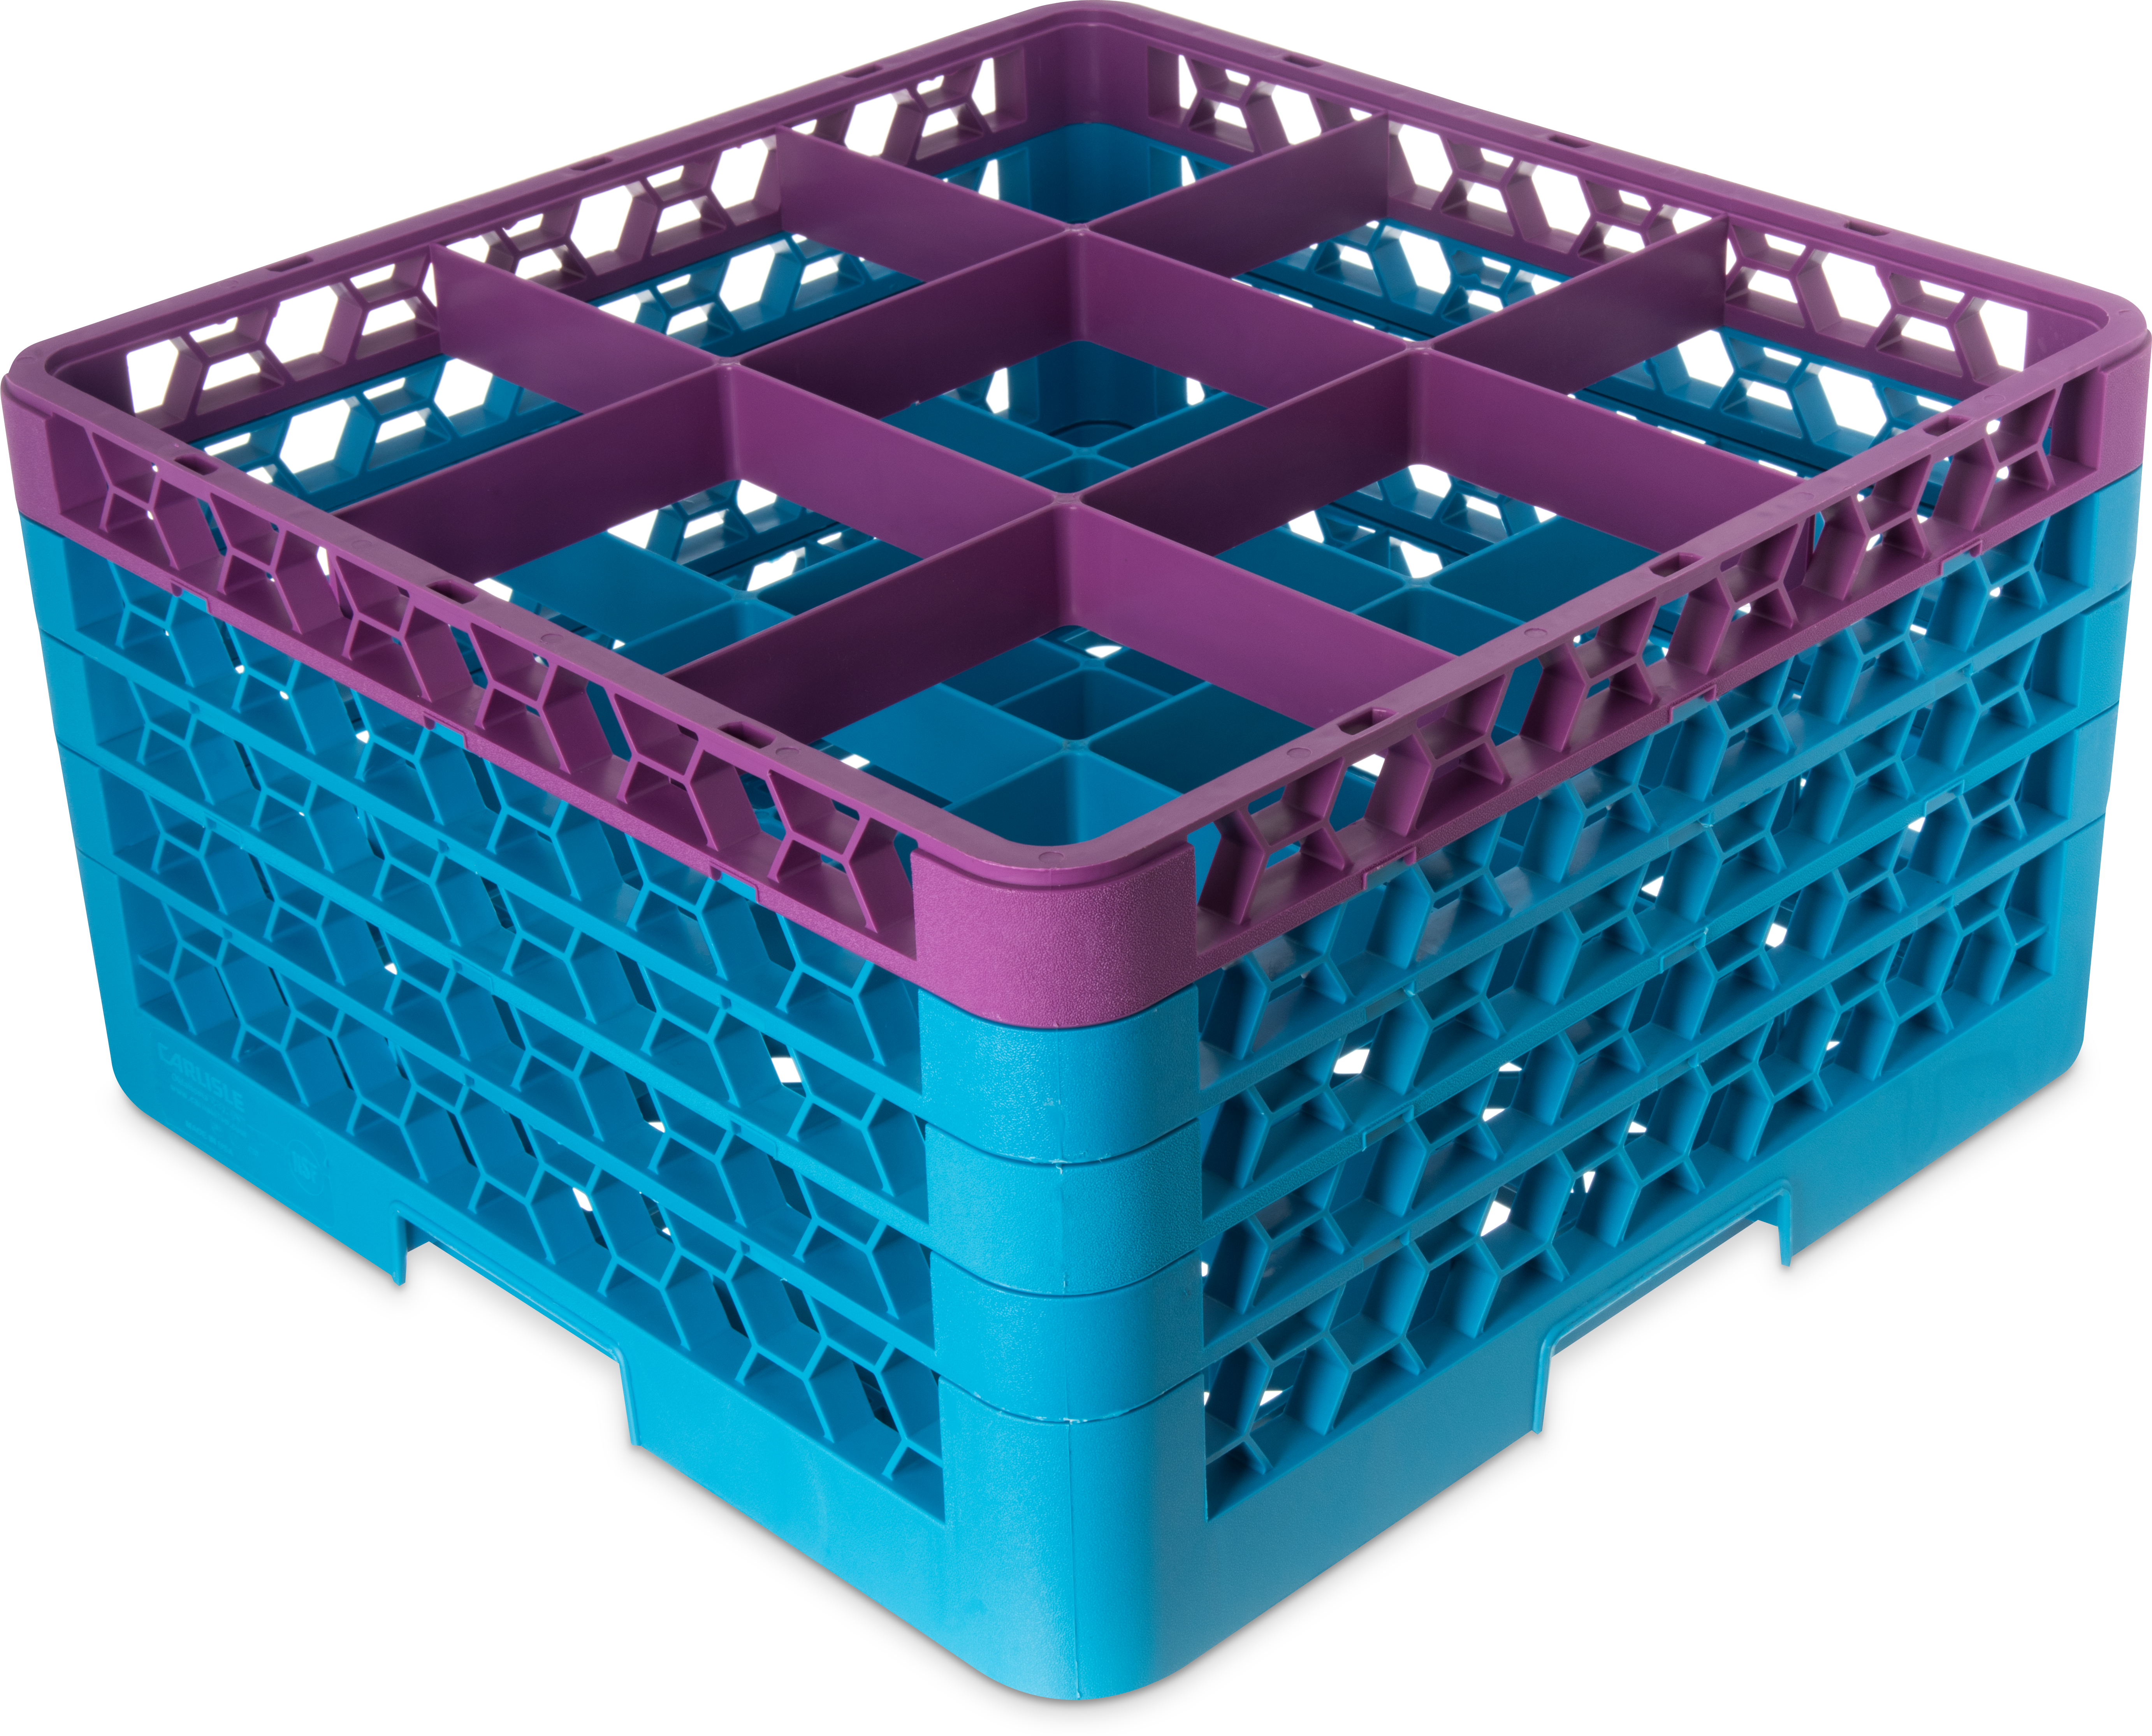 OptiClean 9 Compartment Glass Rack with 4 Extenders 10.3 - Lavender-Carlisle Blue